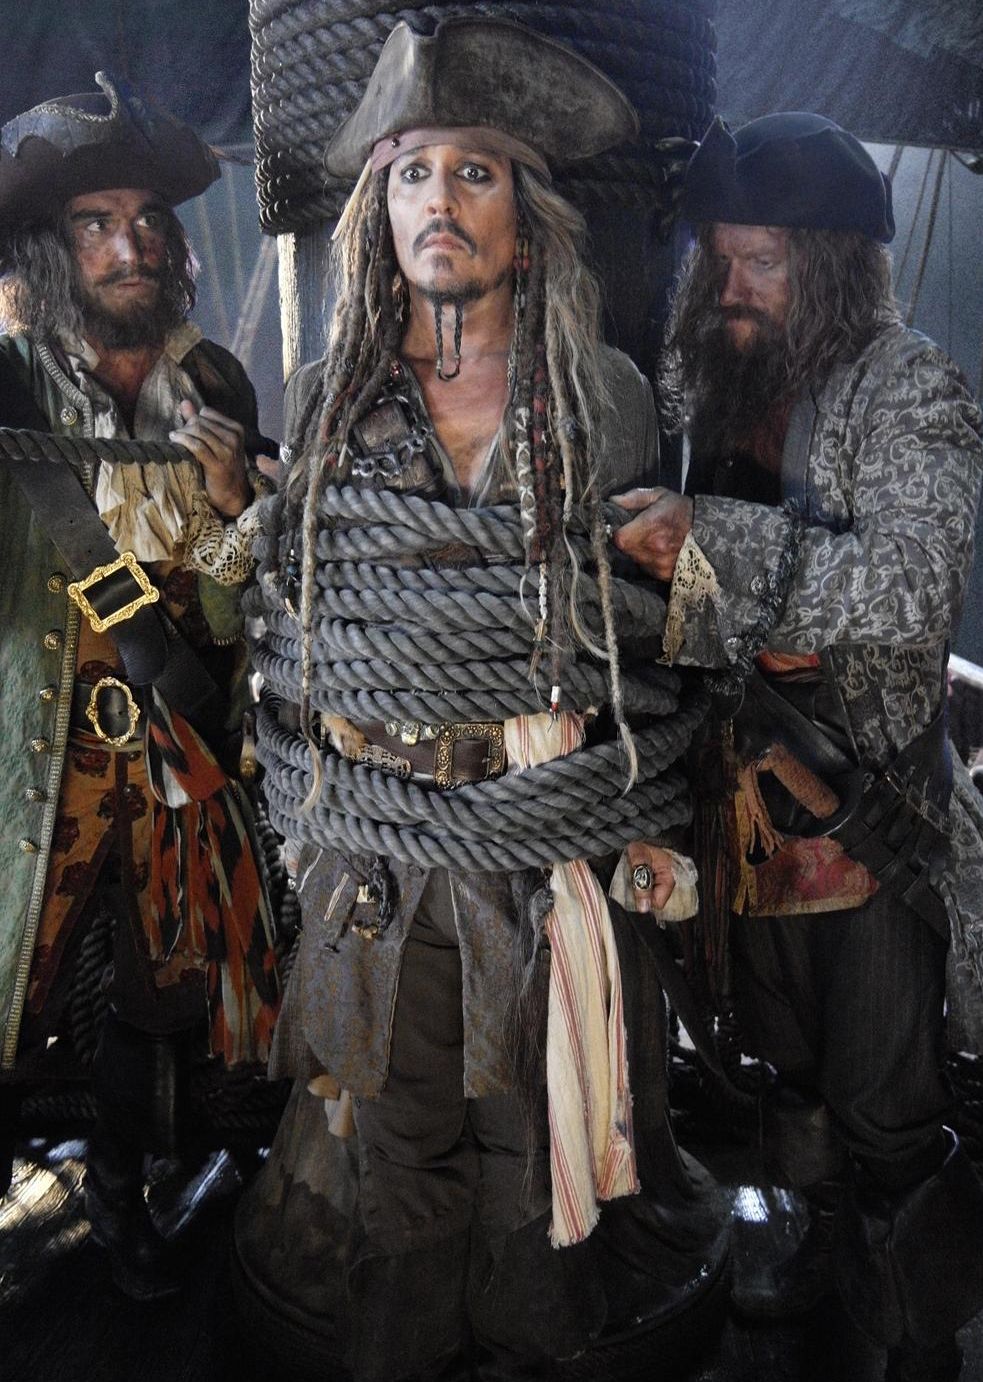 First look at Johnny Depp as Captain Jack Sparrow in ‘Pira